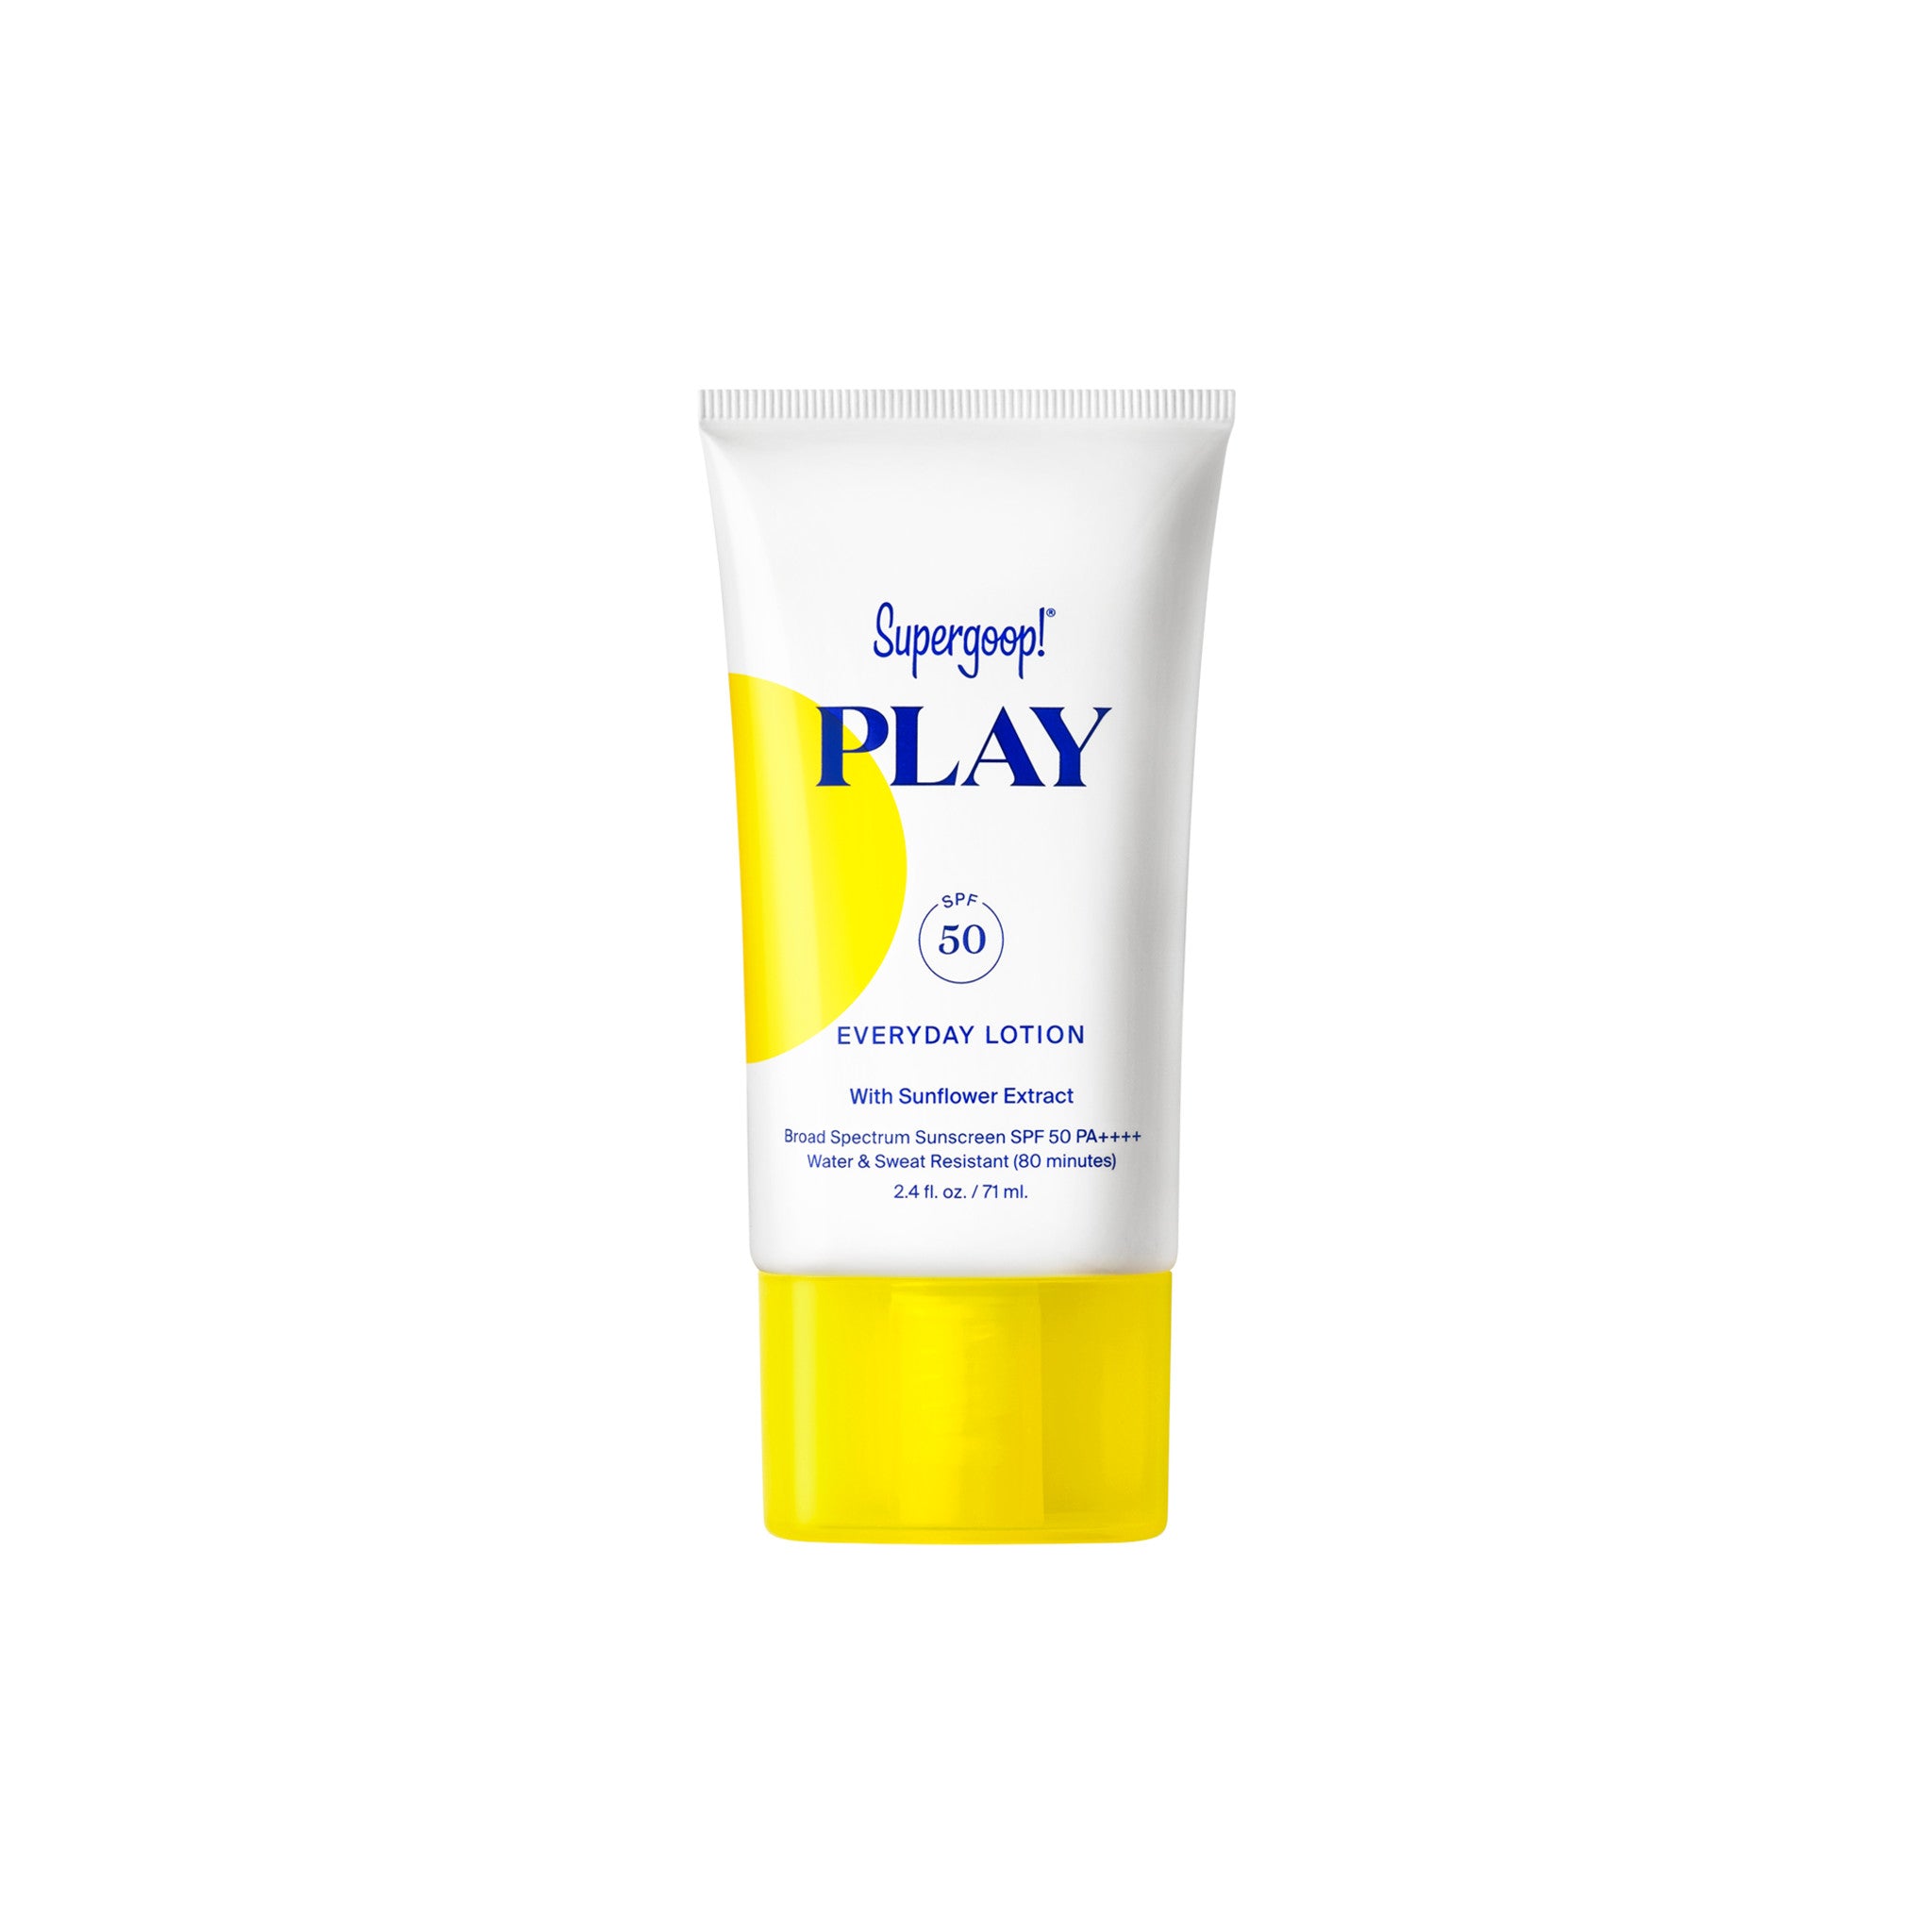 Supergoop! Play Everyday Lotion With Sunflower Extract SPF 50 Size variant: 2.4 oz main image.